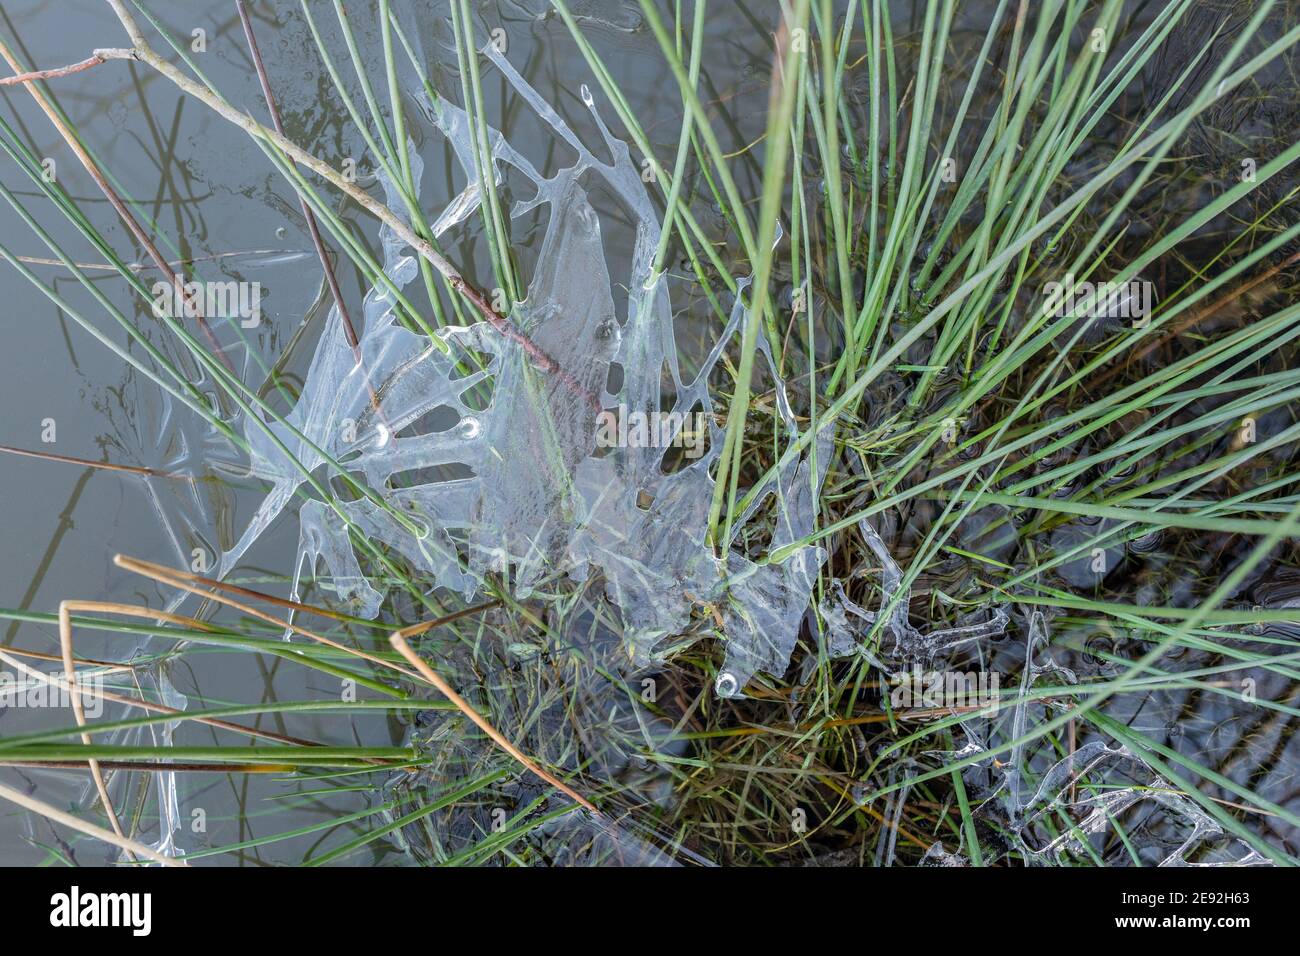 Melting ice formation on plants in a shallow pond. Stock Photo